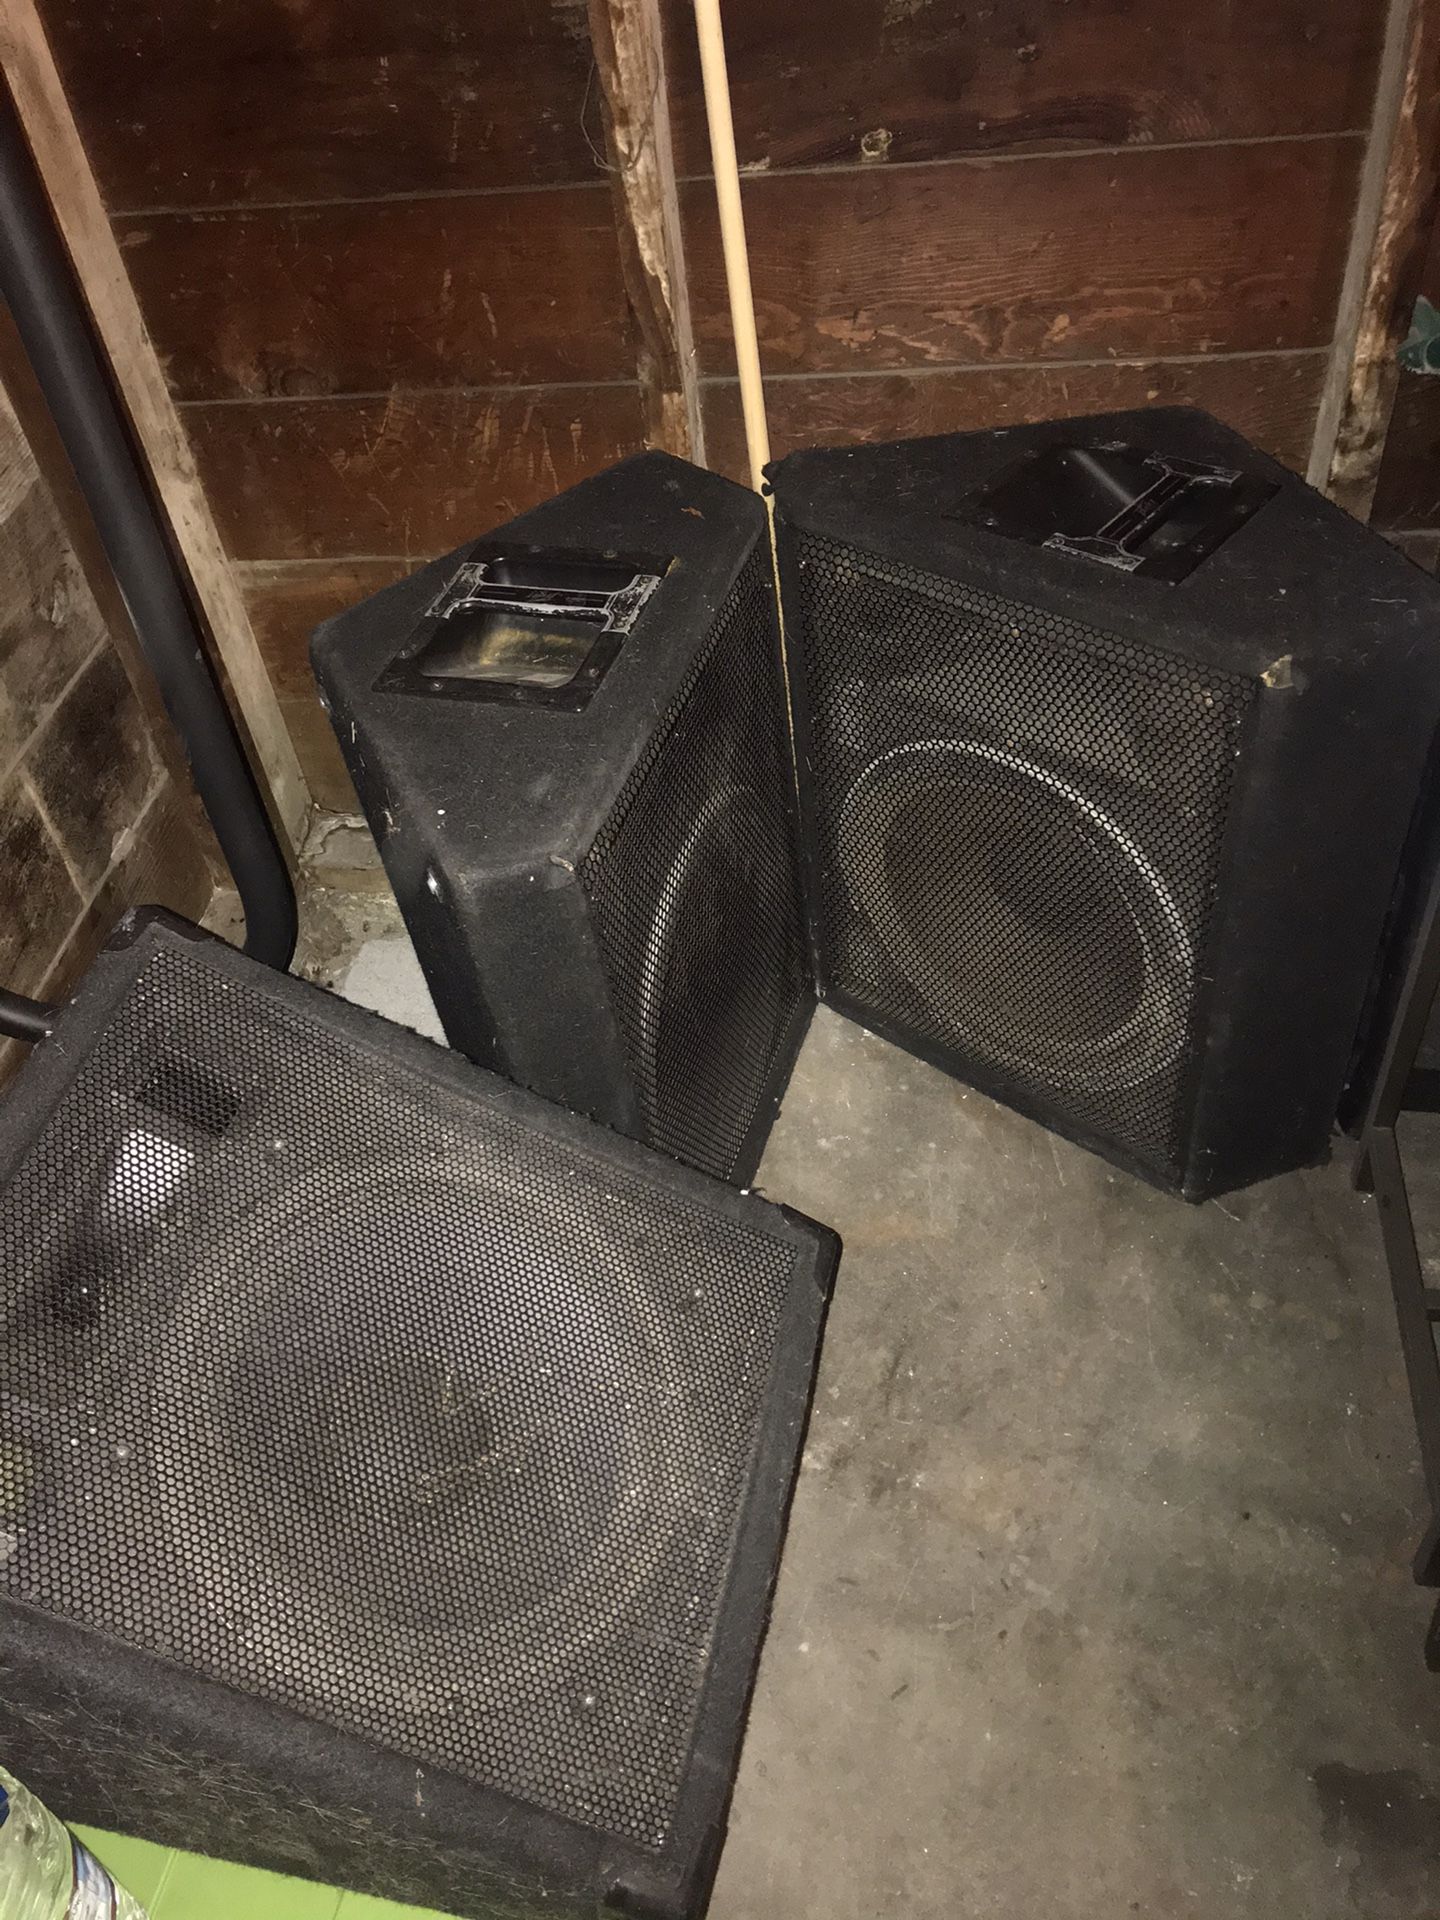 Peavey PA floor monitors and Behringer power amp